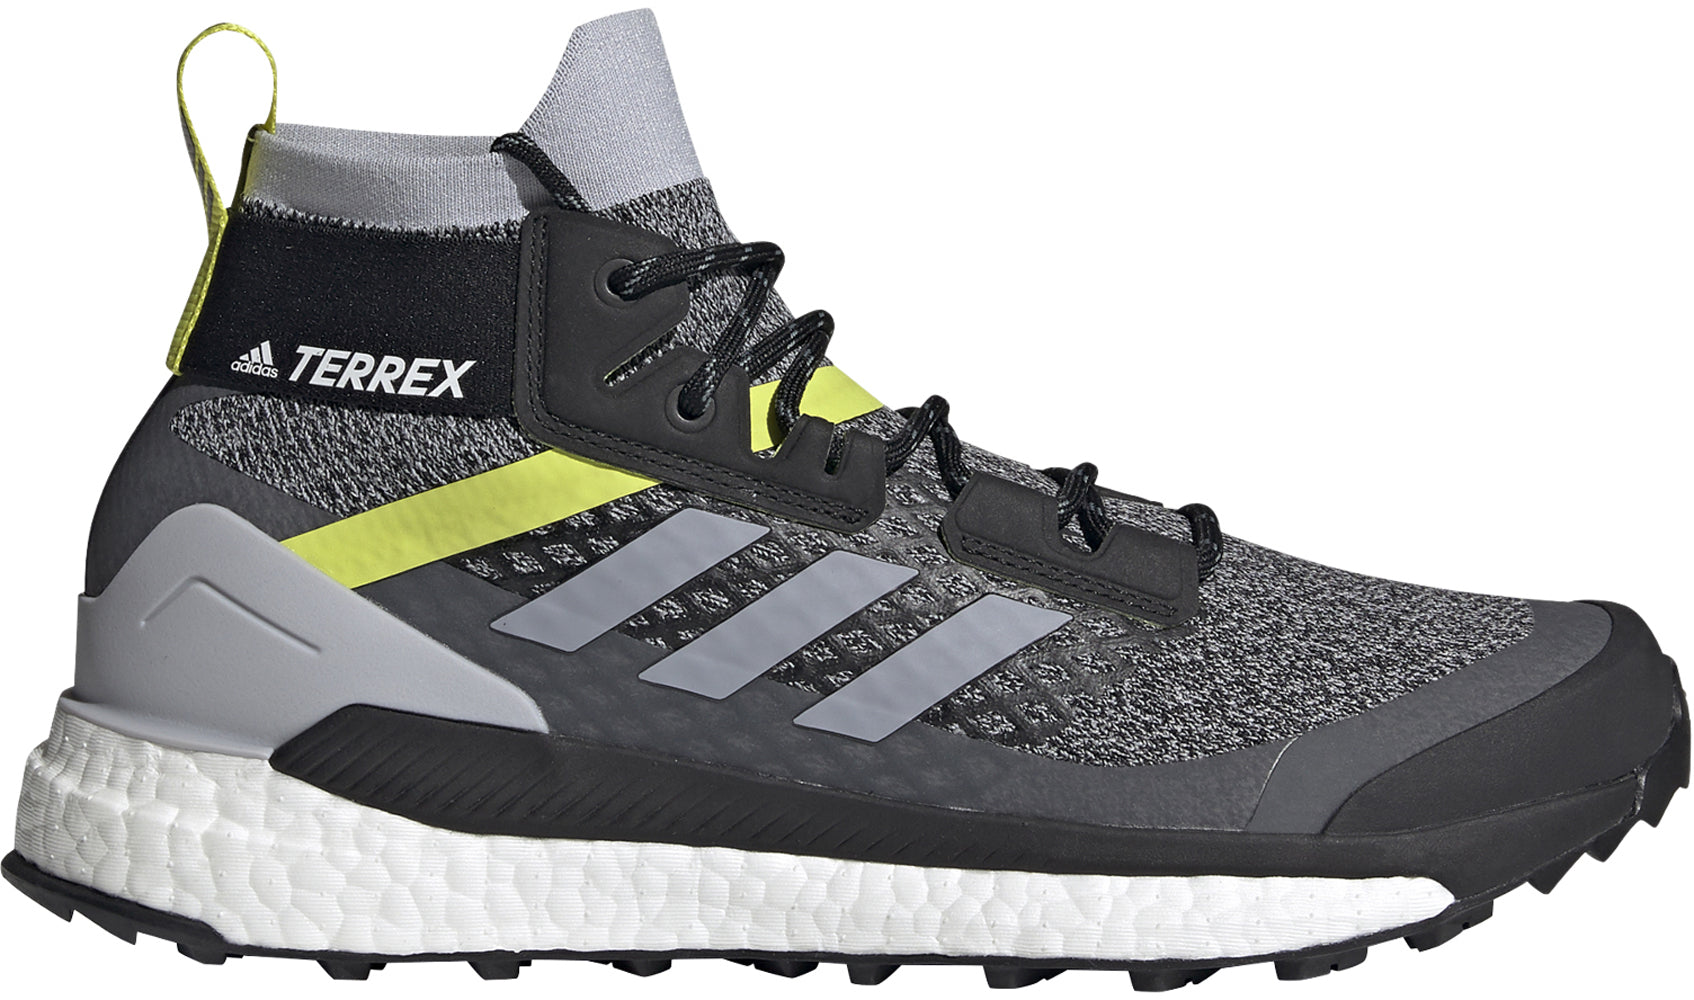 Men's adidas Terrex Free Hiker Primeblue Hiking Shoe in Halo Silver/Halo Silver/Core Black from the side